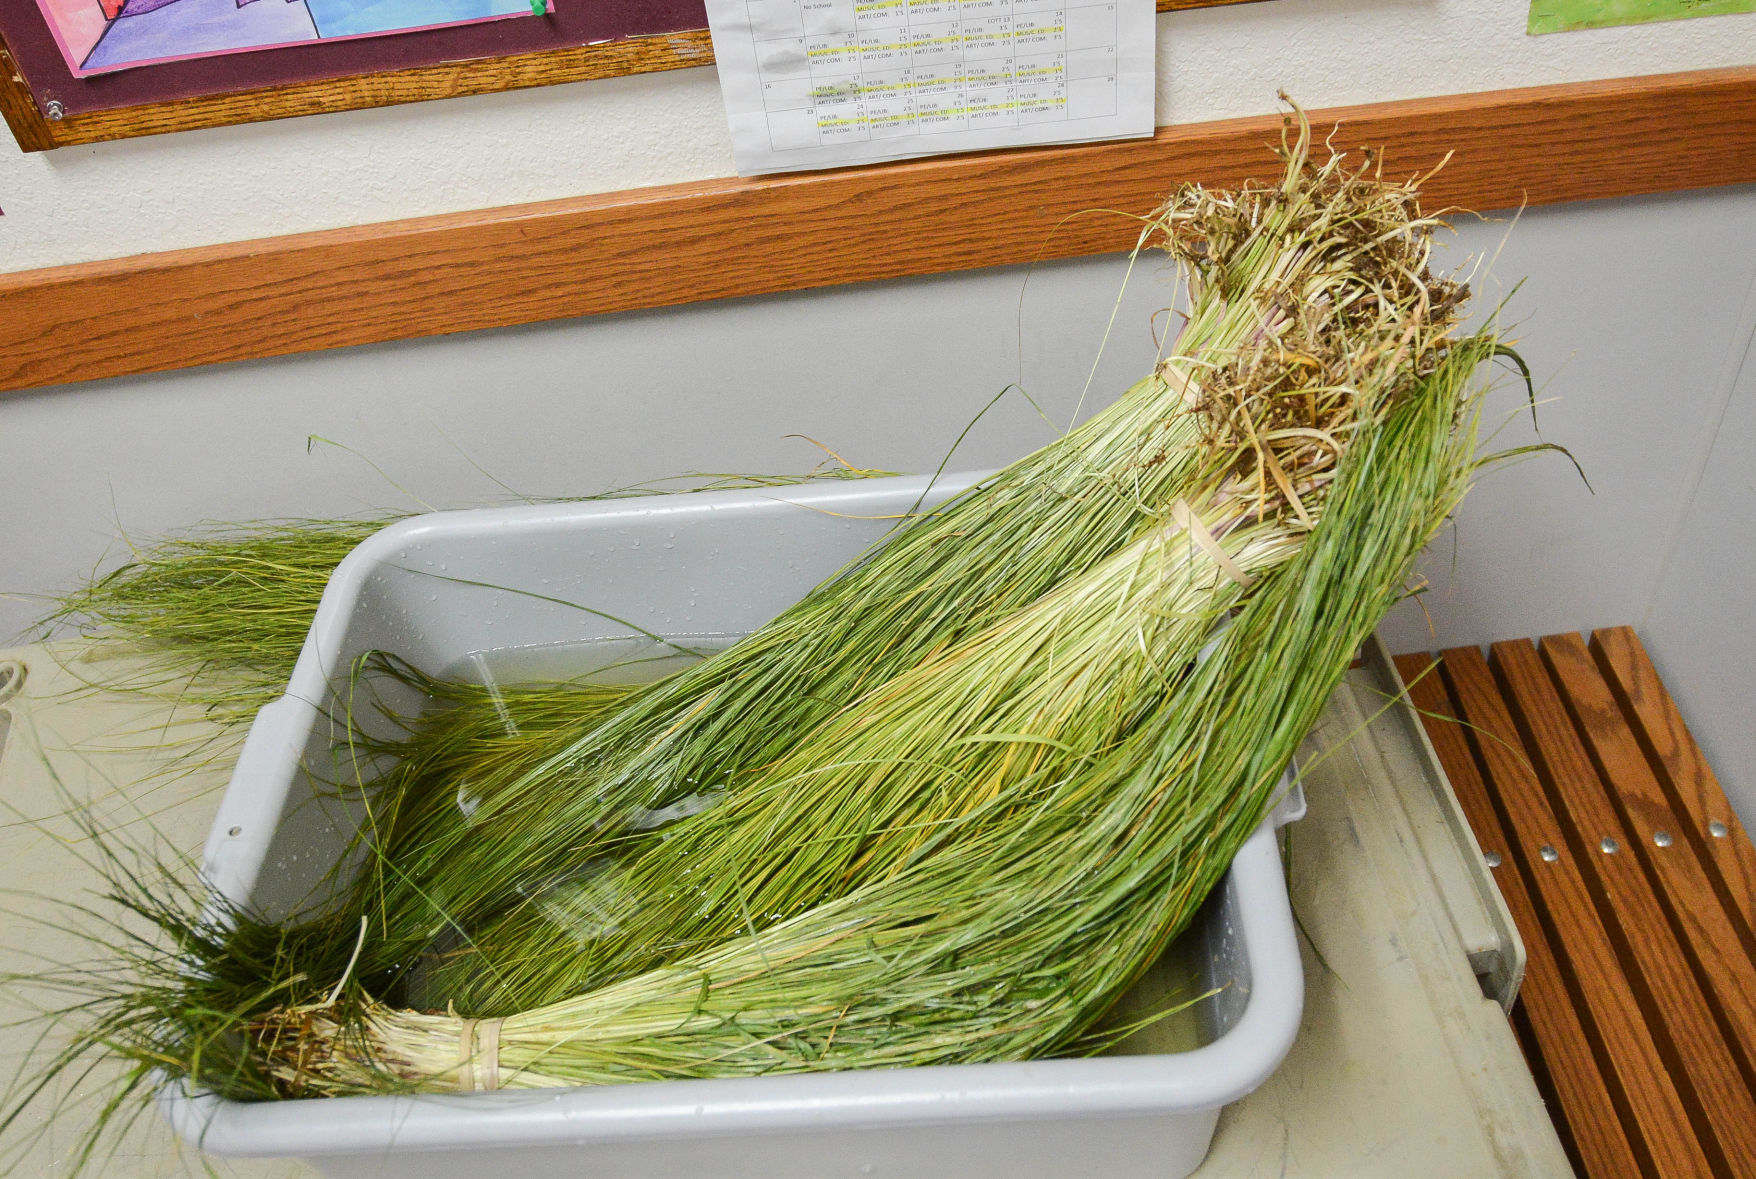 braiding sweetgrass for young adults